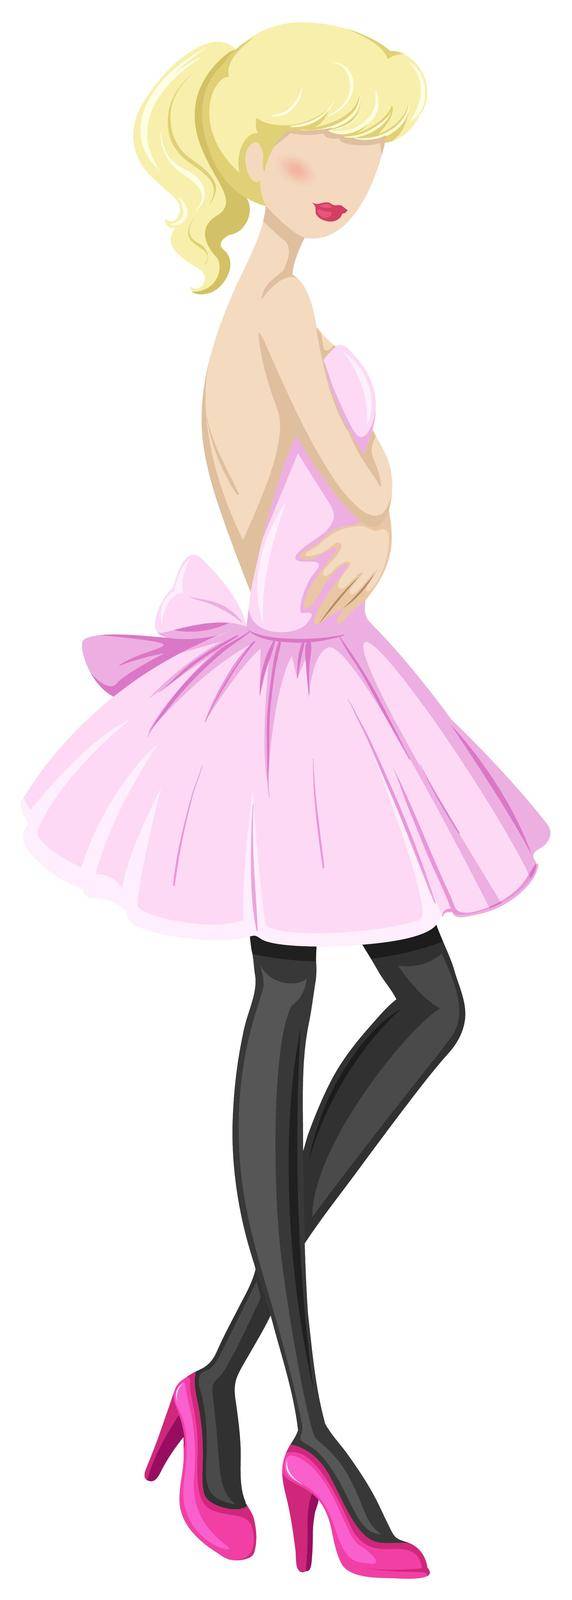 Sketch of a woman win pink backless dress and black stockings